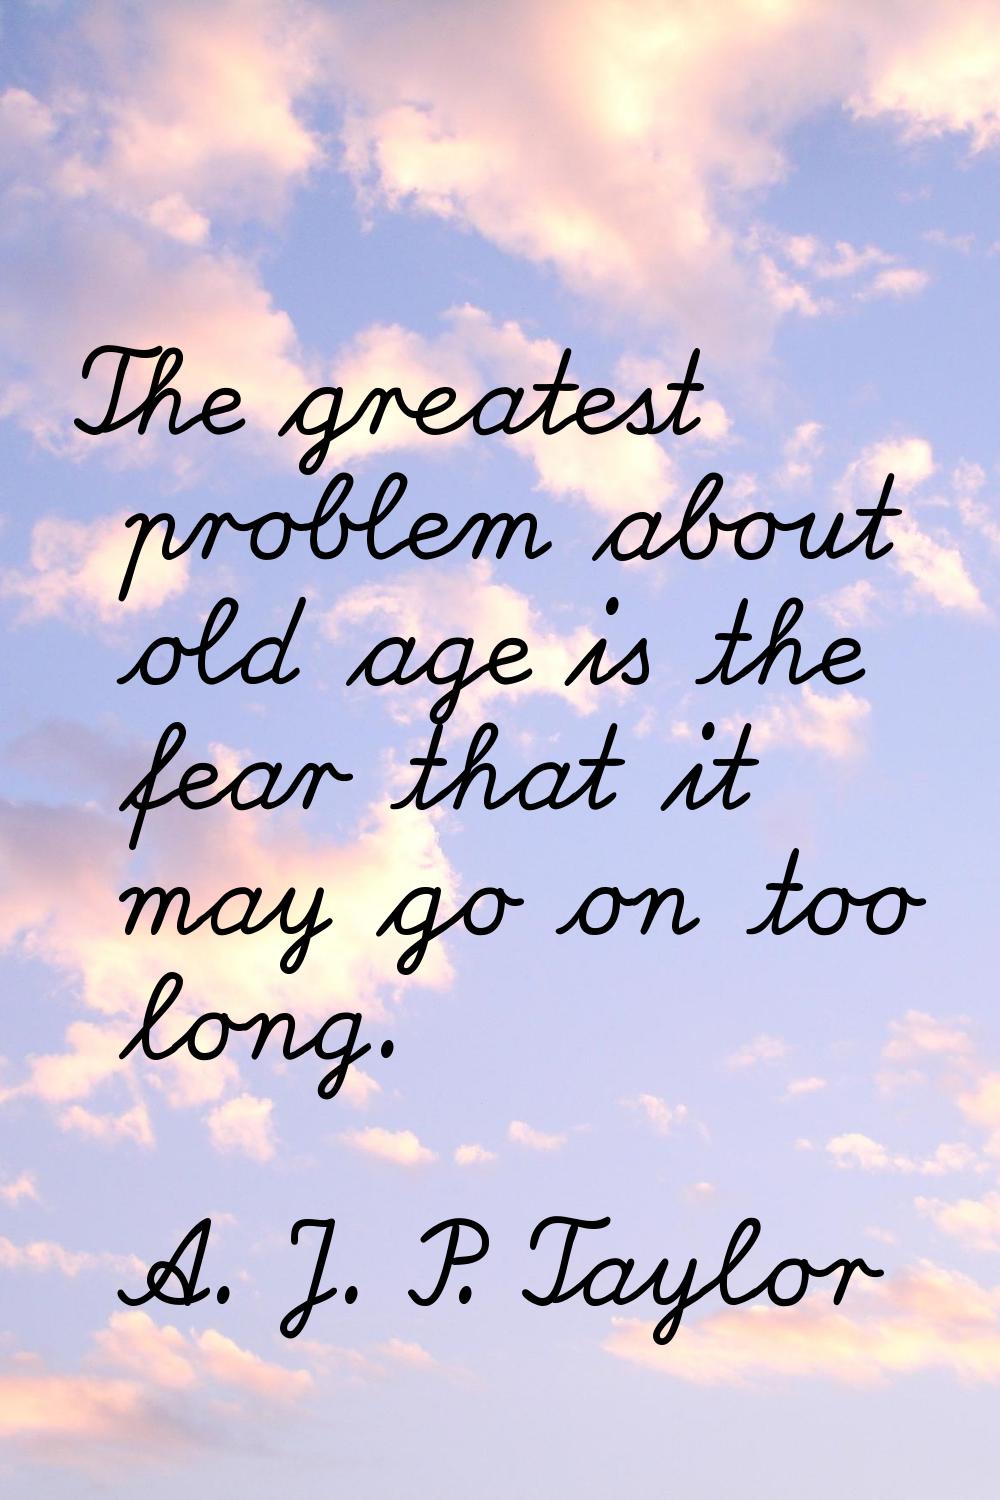 The greatest problem about old age is the fear that it may go on too long.